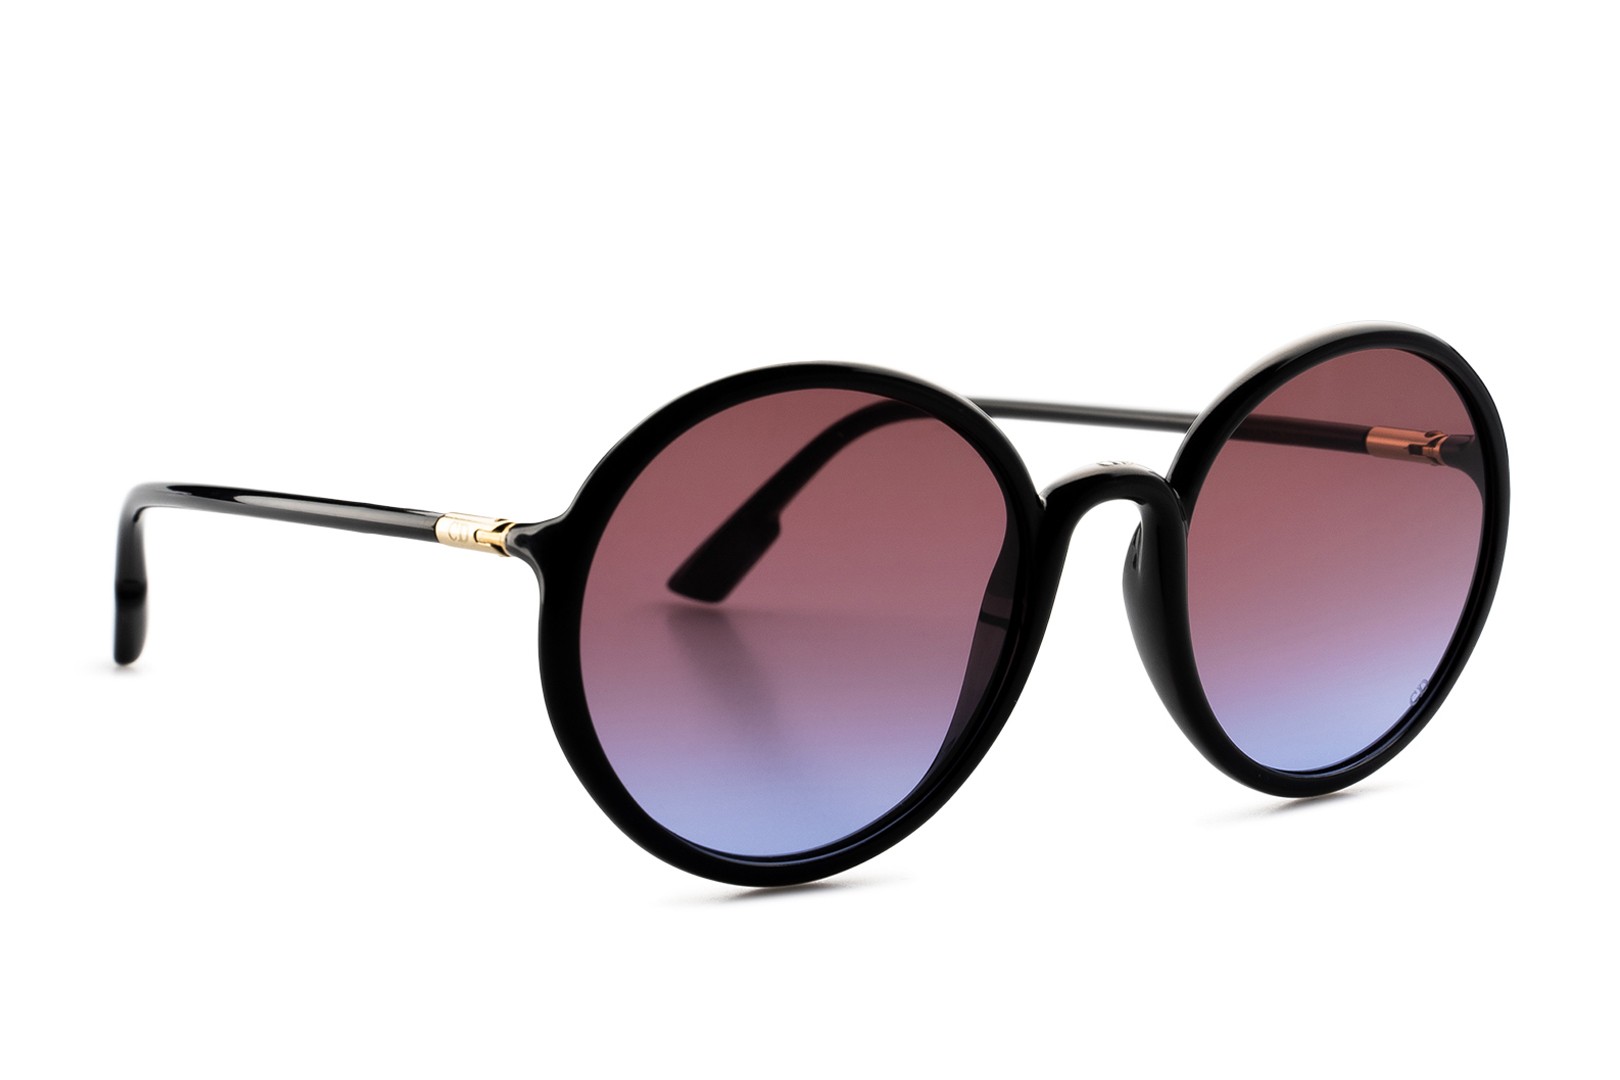 DIOR  DIOR GIPSY 2 SUNGLASSES IN GOLD GREY  NEW IN BOX  RELUXE AU